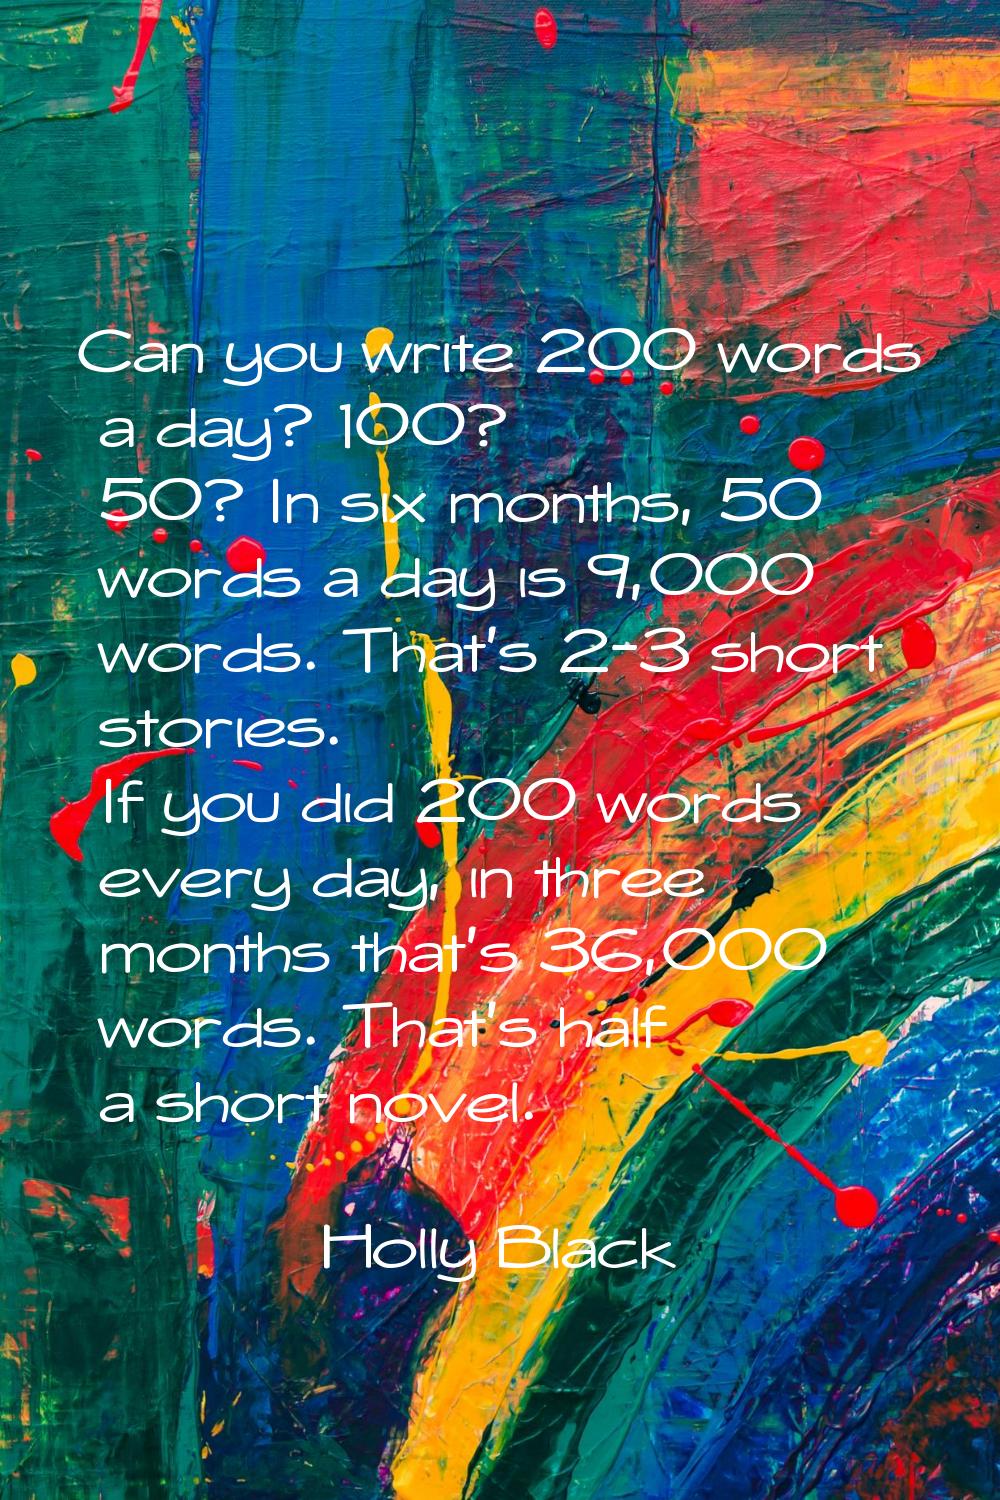 Can you write 200 words a day? 100? 50? In six months, 50 words a day is 9,000 words. That's 2-3 sh